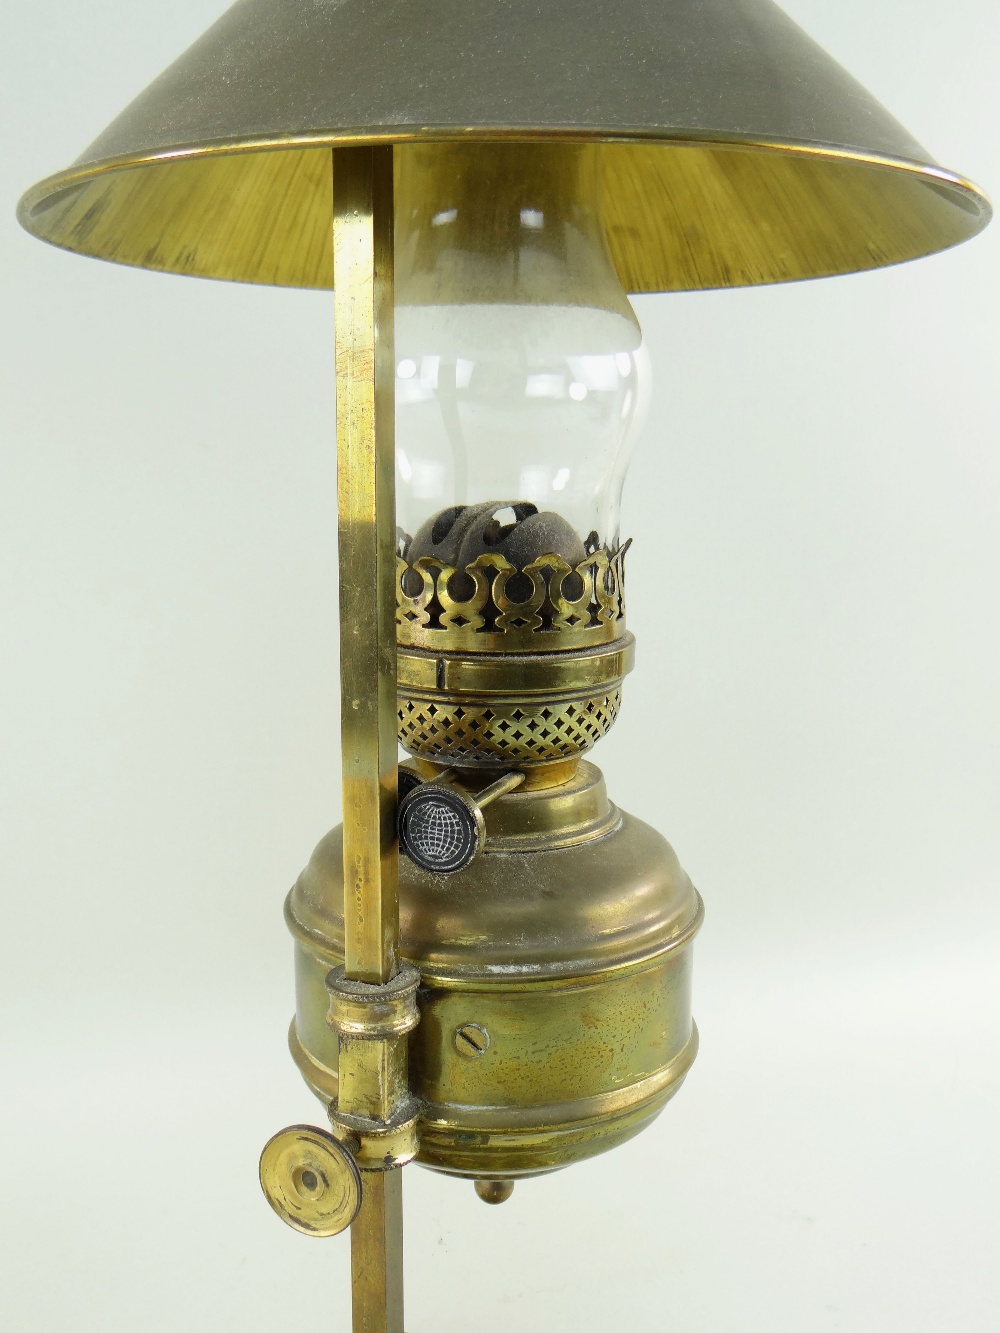 VICTORIAN-STYLE PLATED BRASS ADJUSTABLE OIL LAMP, 57cms high - Image 2 of 2